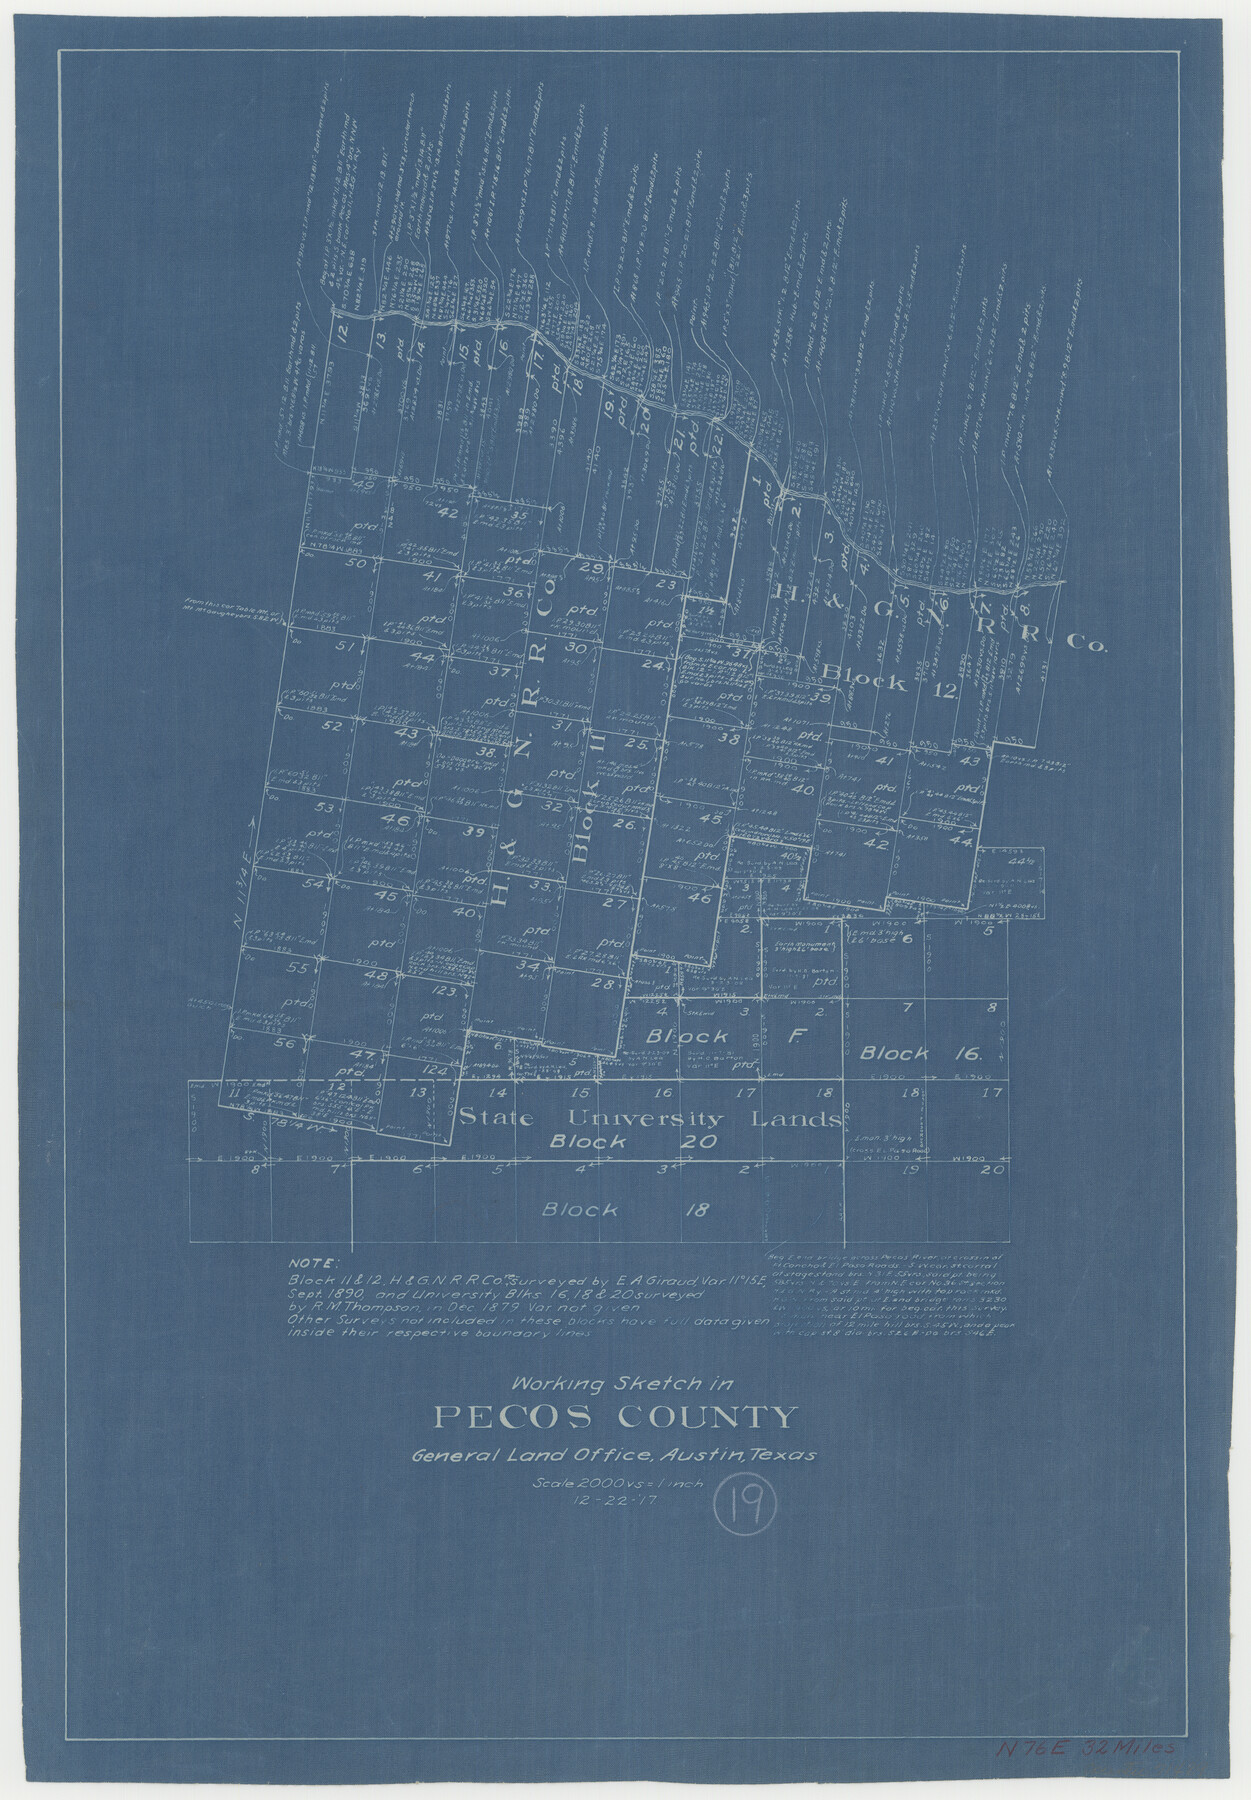 71489, Pecos County Working Sketch 19, General Map Collection